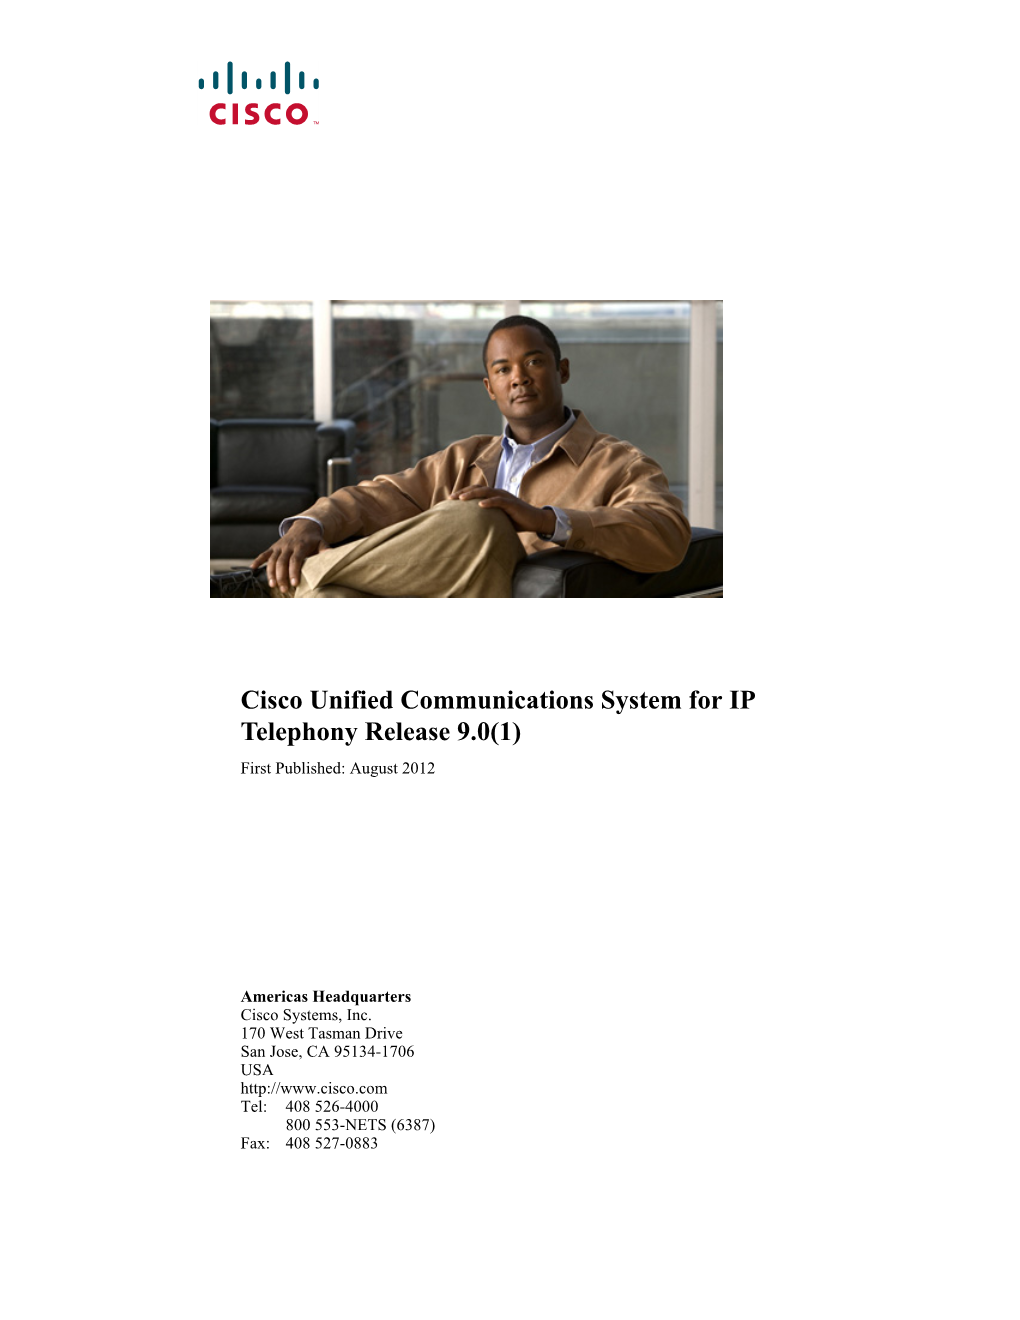 Cisco Unified Communications System for IP Telephony Release 9.0(1) First Published: August 2012